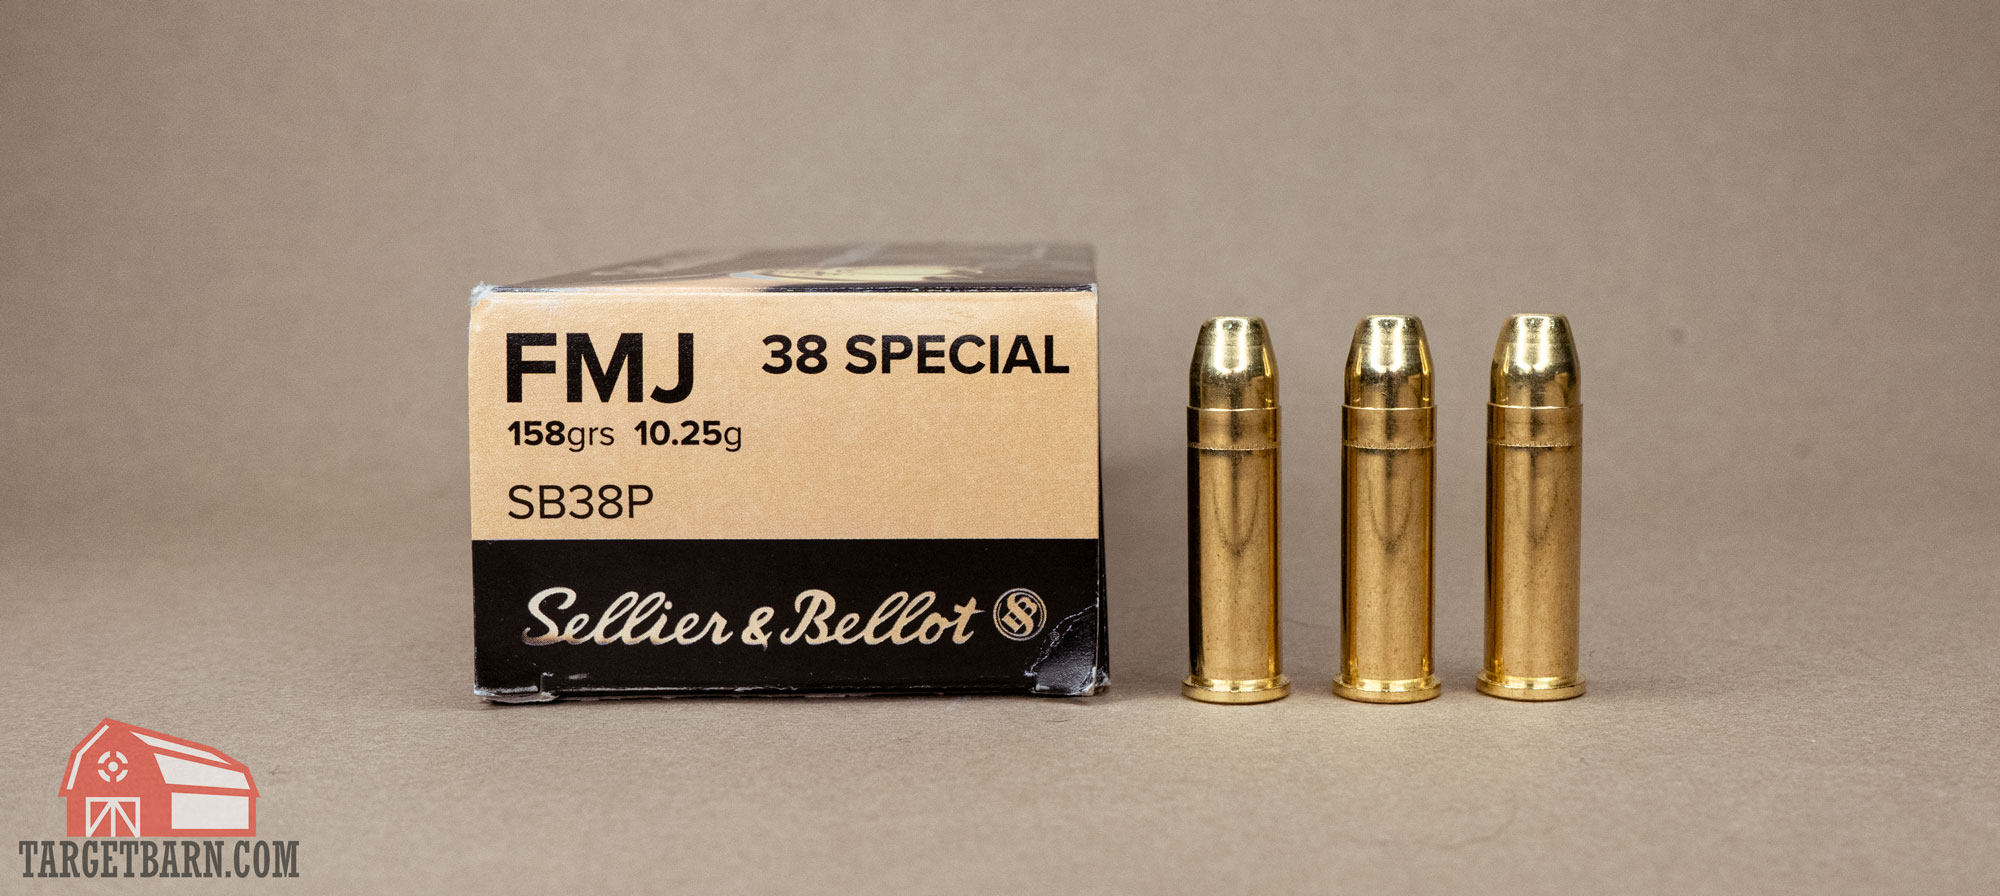 Are 38 S&W vs 38 Special Ammo interchangeable?